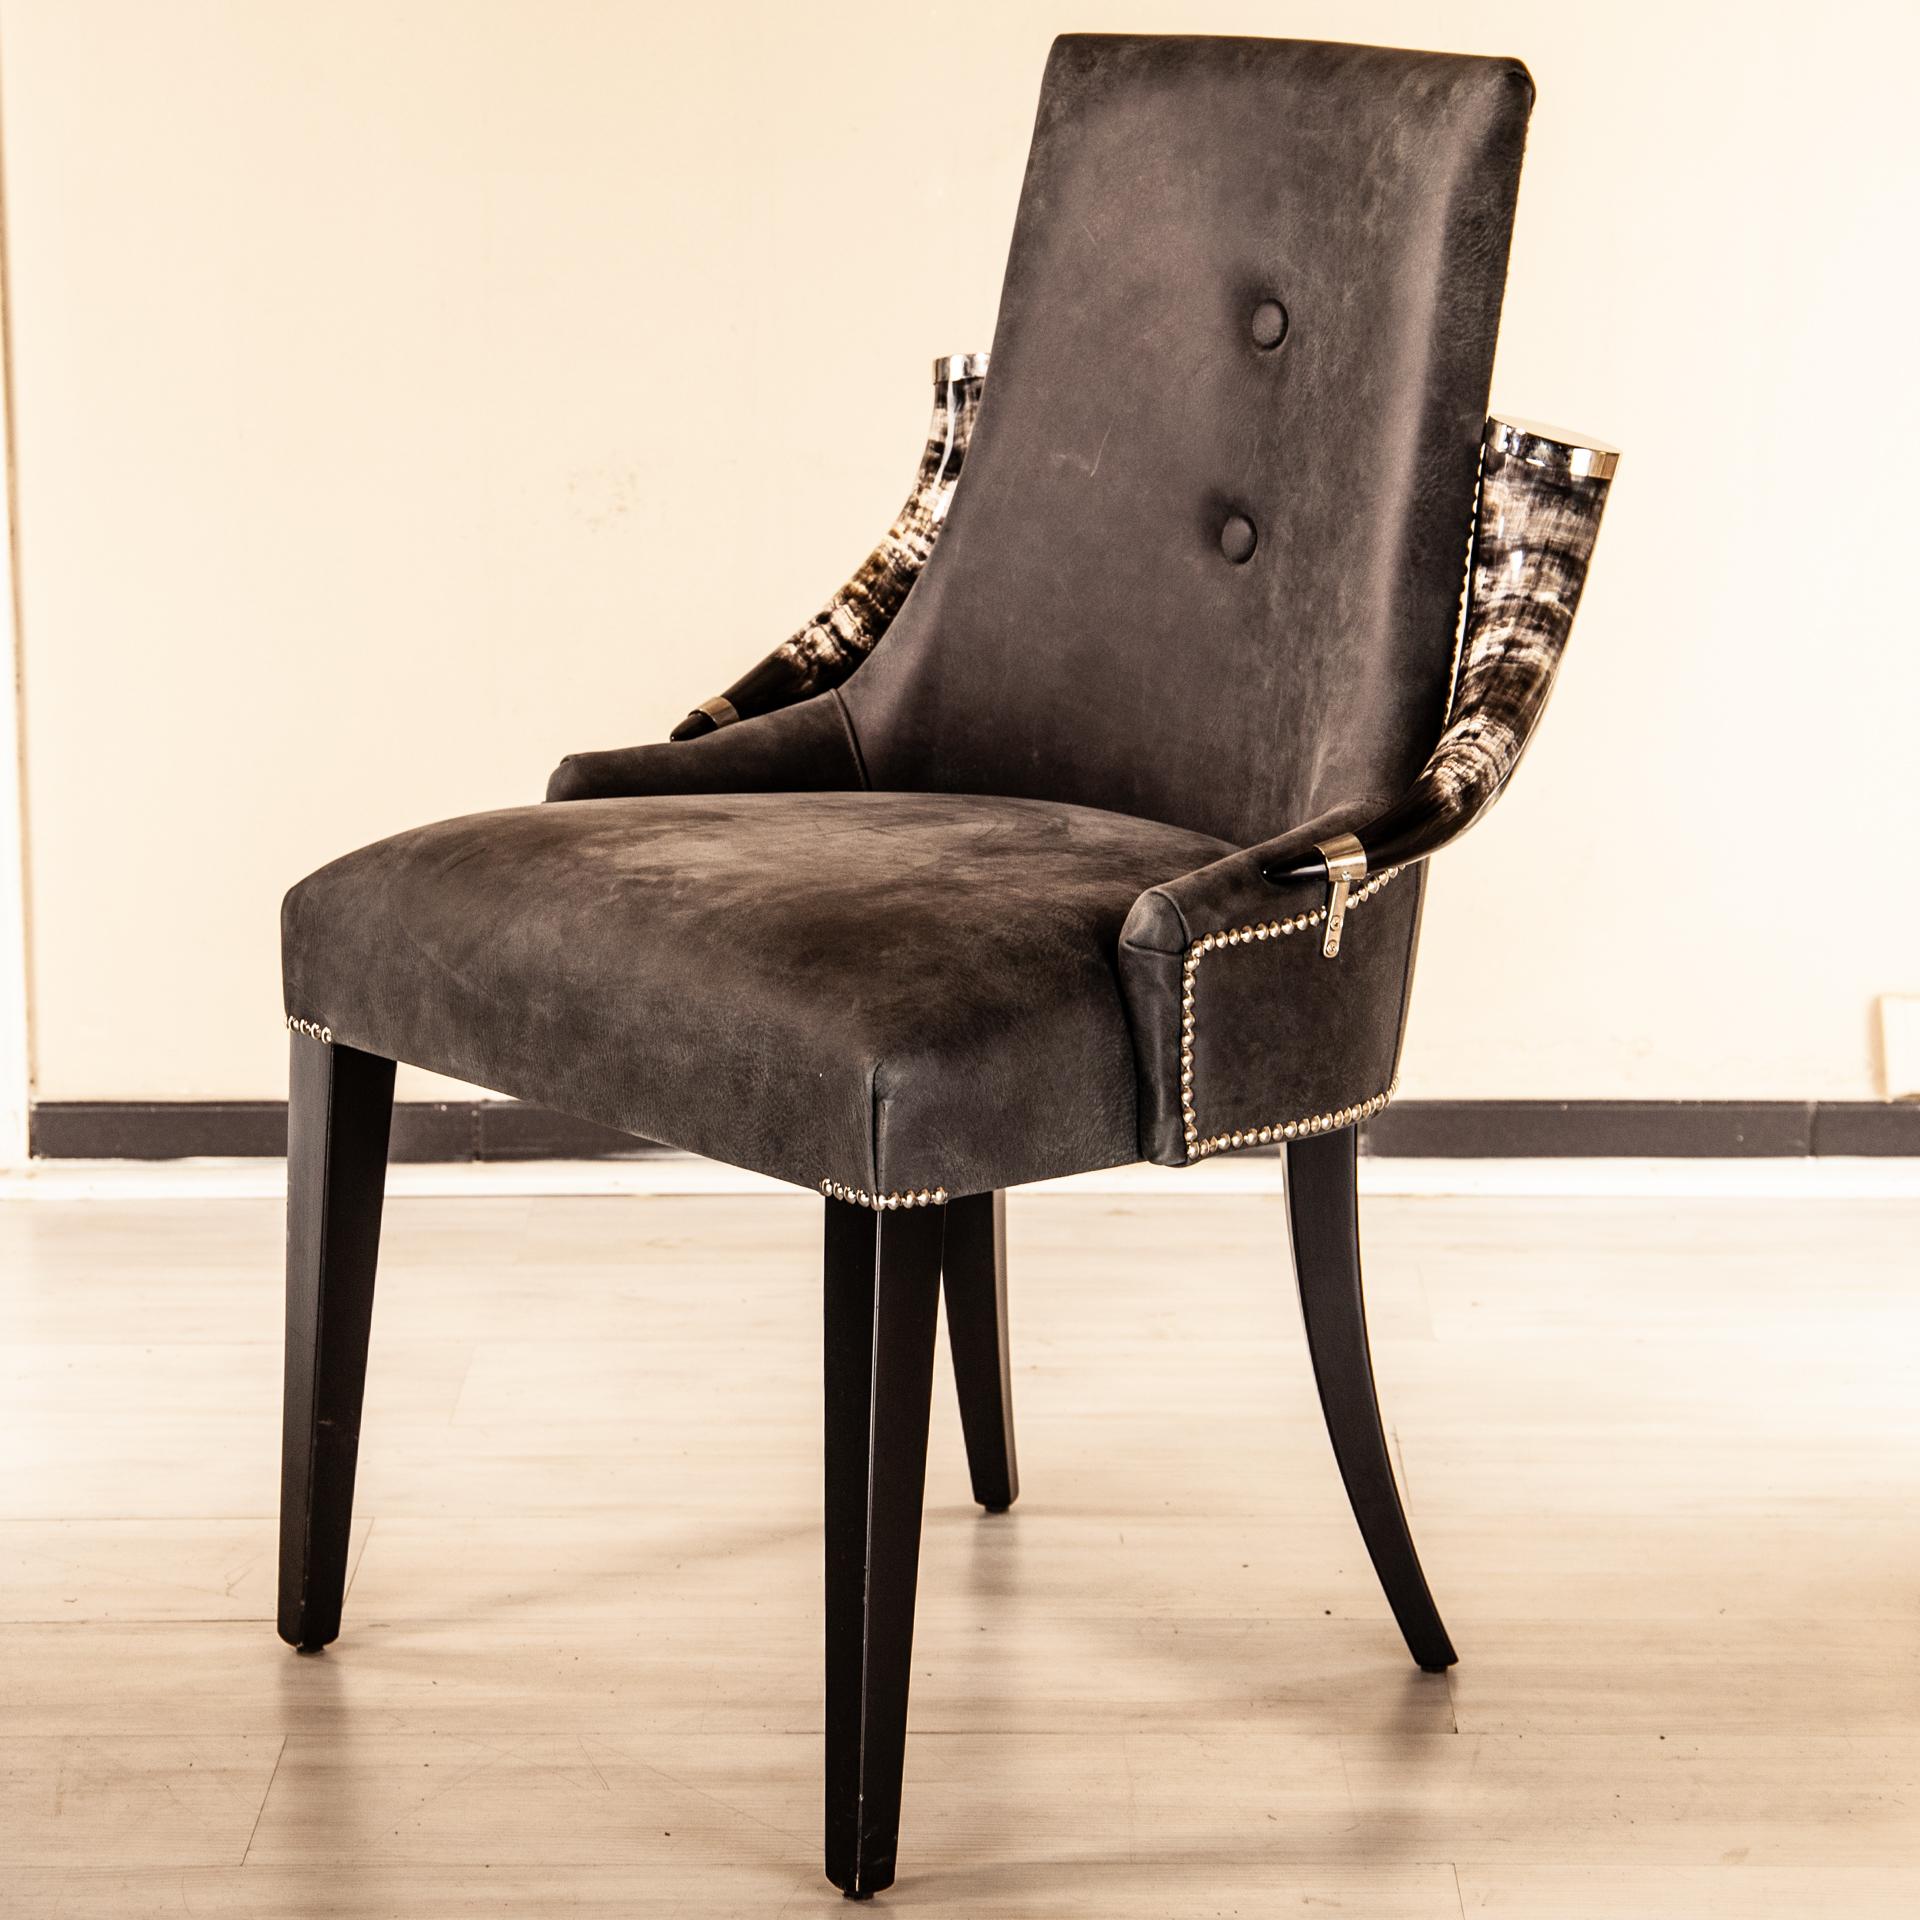 Madagascar armchair with two American Horn arm-rest that are finished with brass element caps and connection element to the frame.
Here shown with a primo fiore Tuscan antique gray taupe leather. Upholsterer nails to close and stretch the